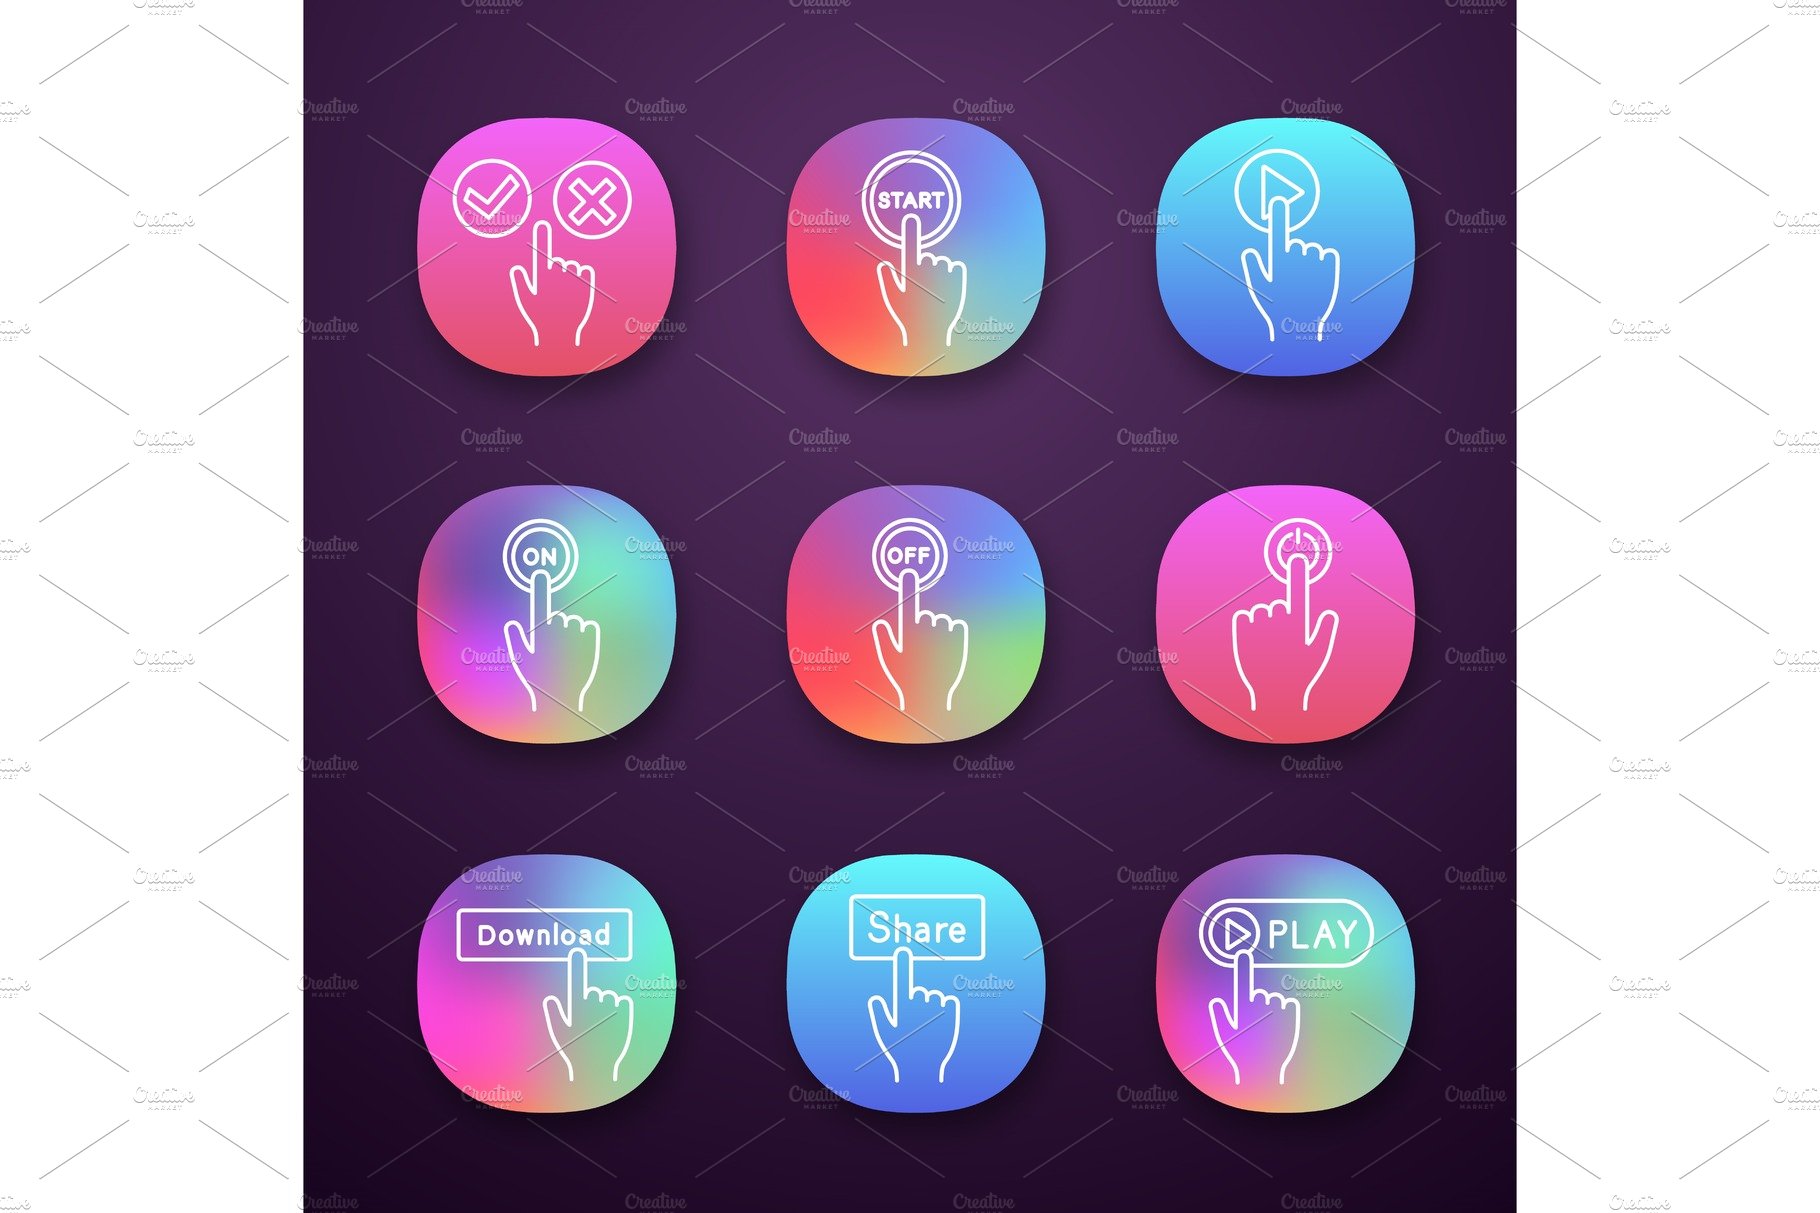 App buttons icons set cover image.